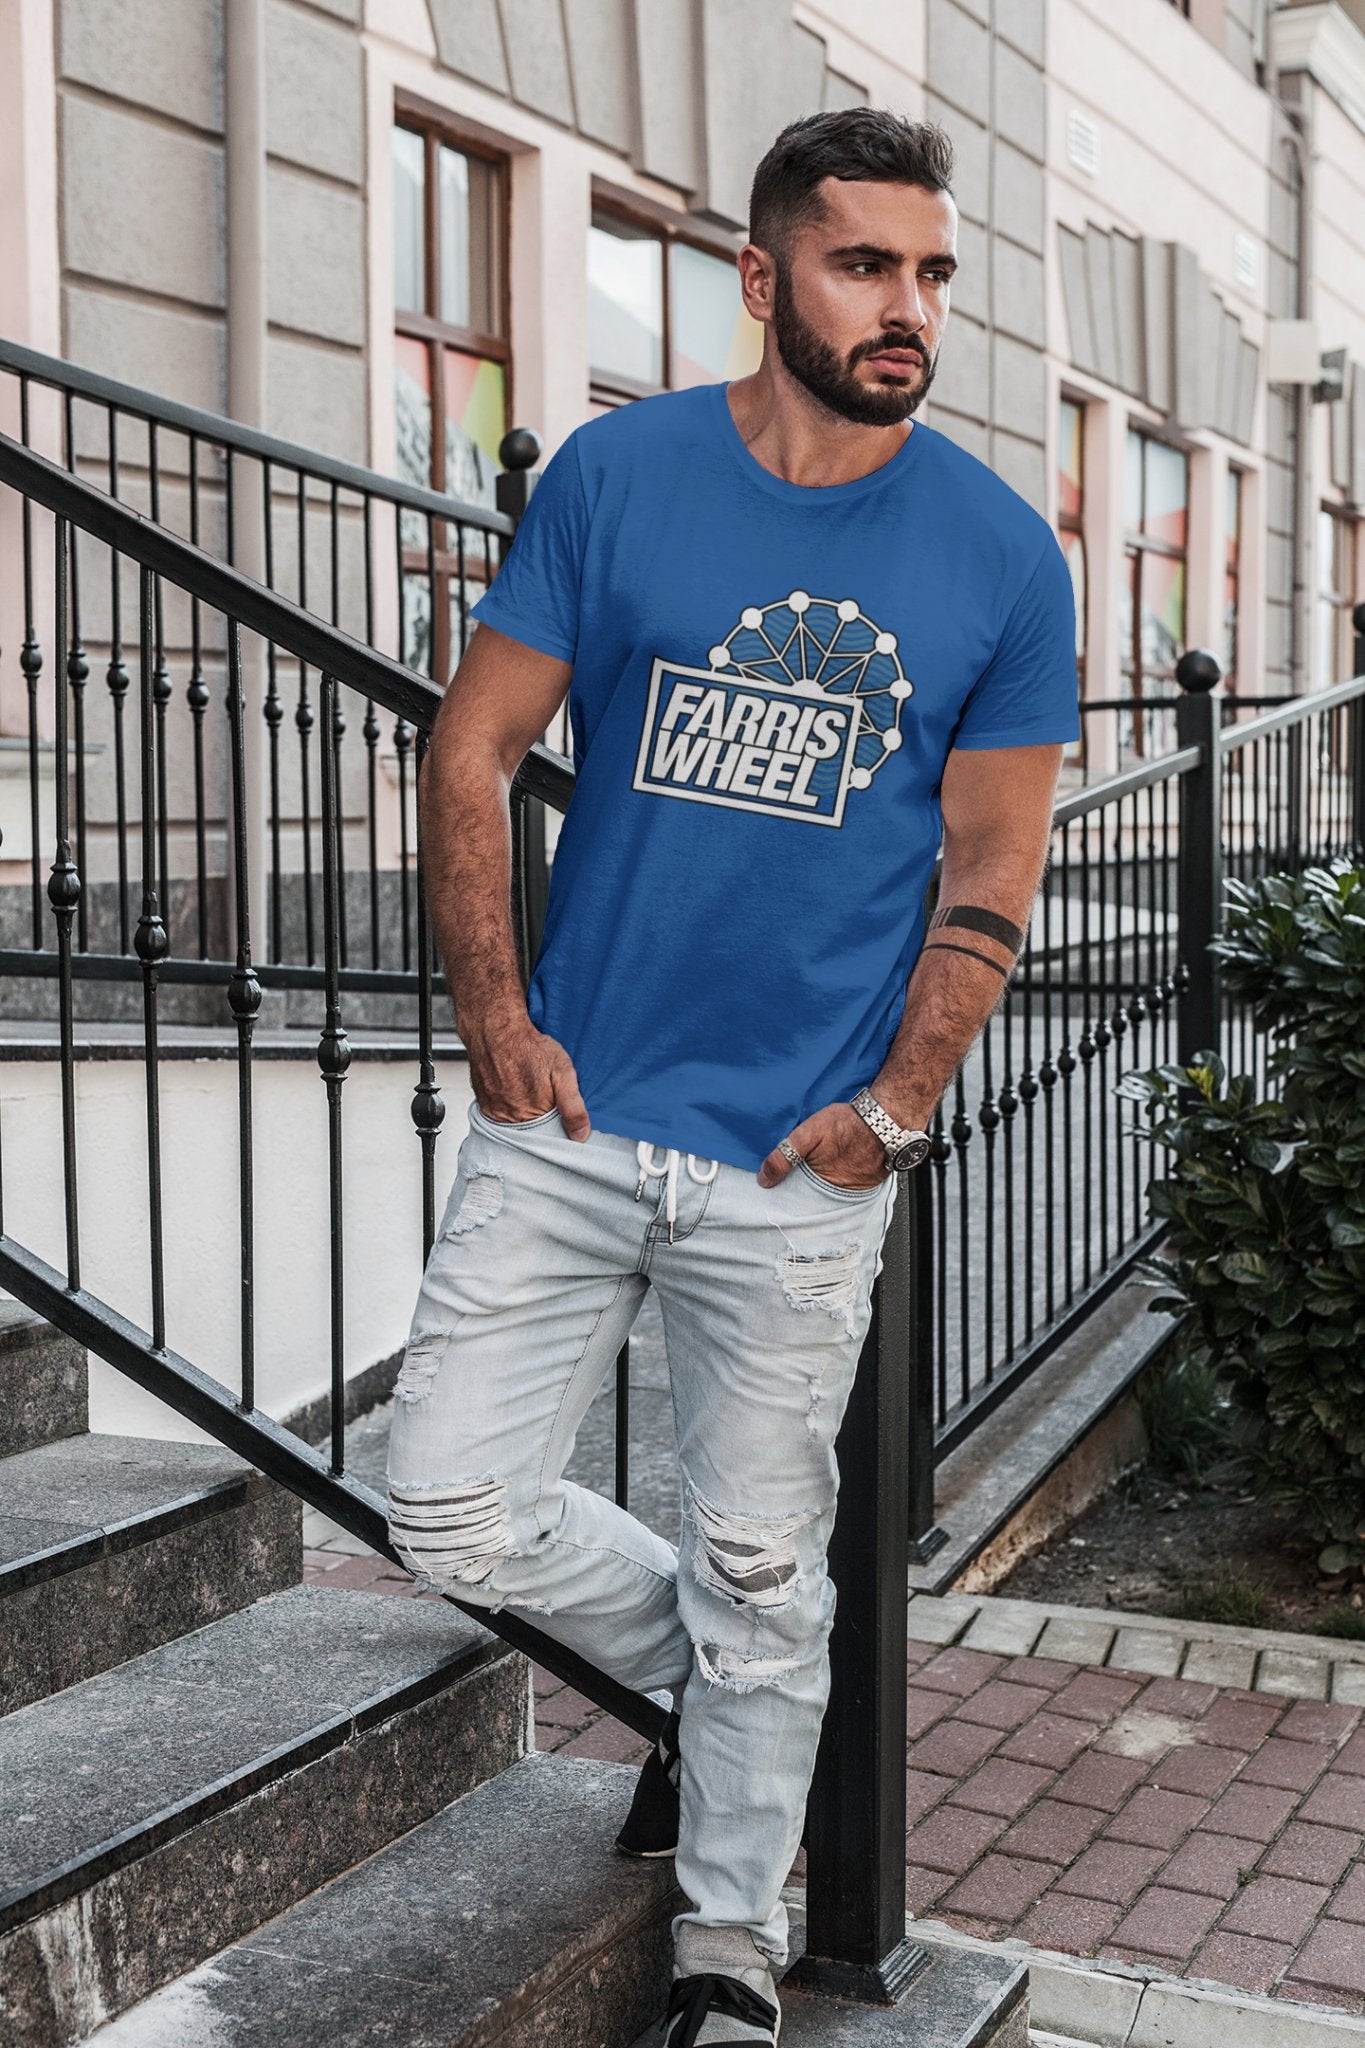 Farris Wheel Blue Wave Unisex T-shirt - BeExtra! Apparel & More